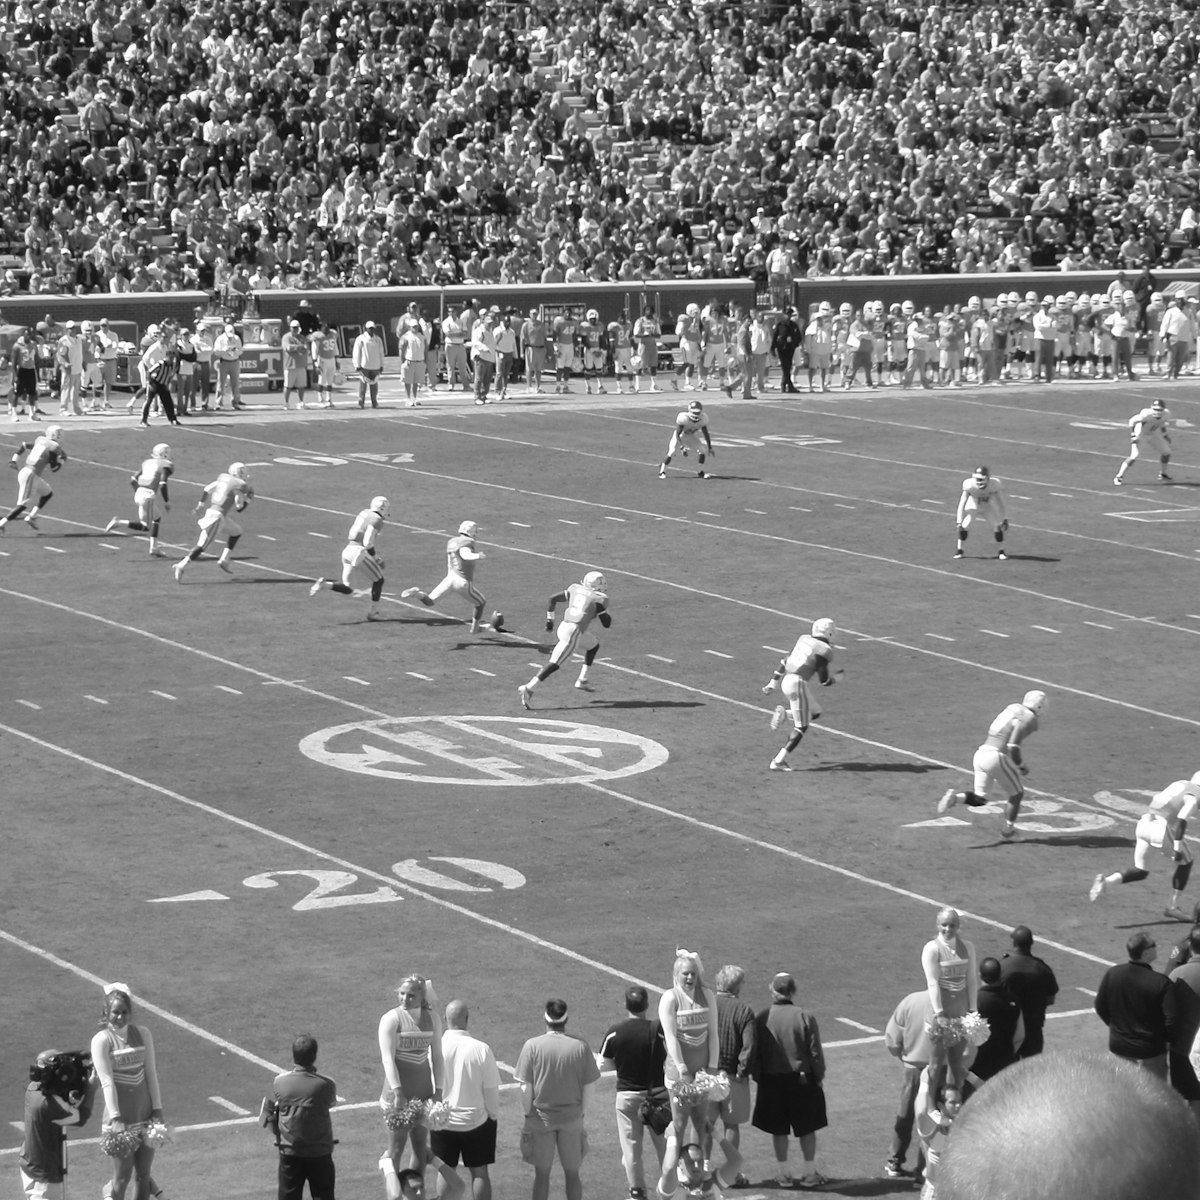 Football at University of Tennessee, Knoxville